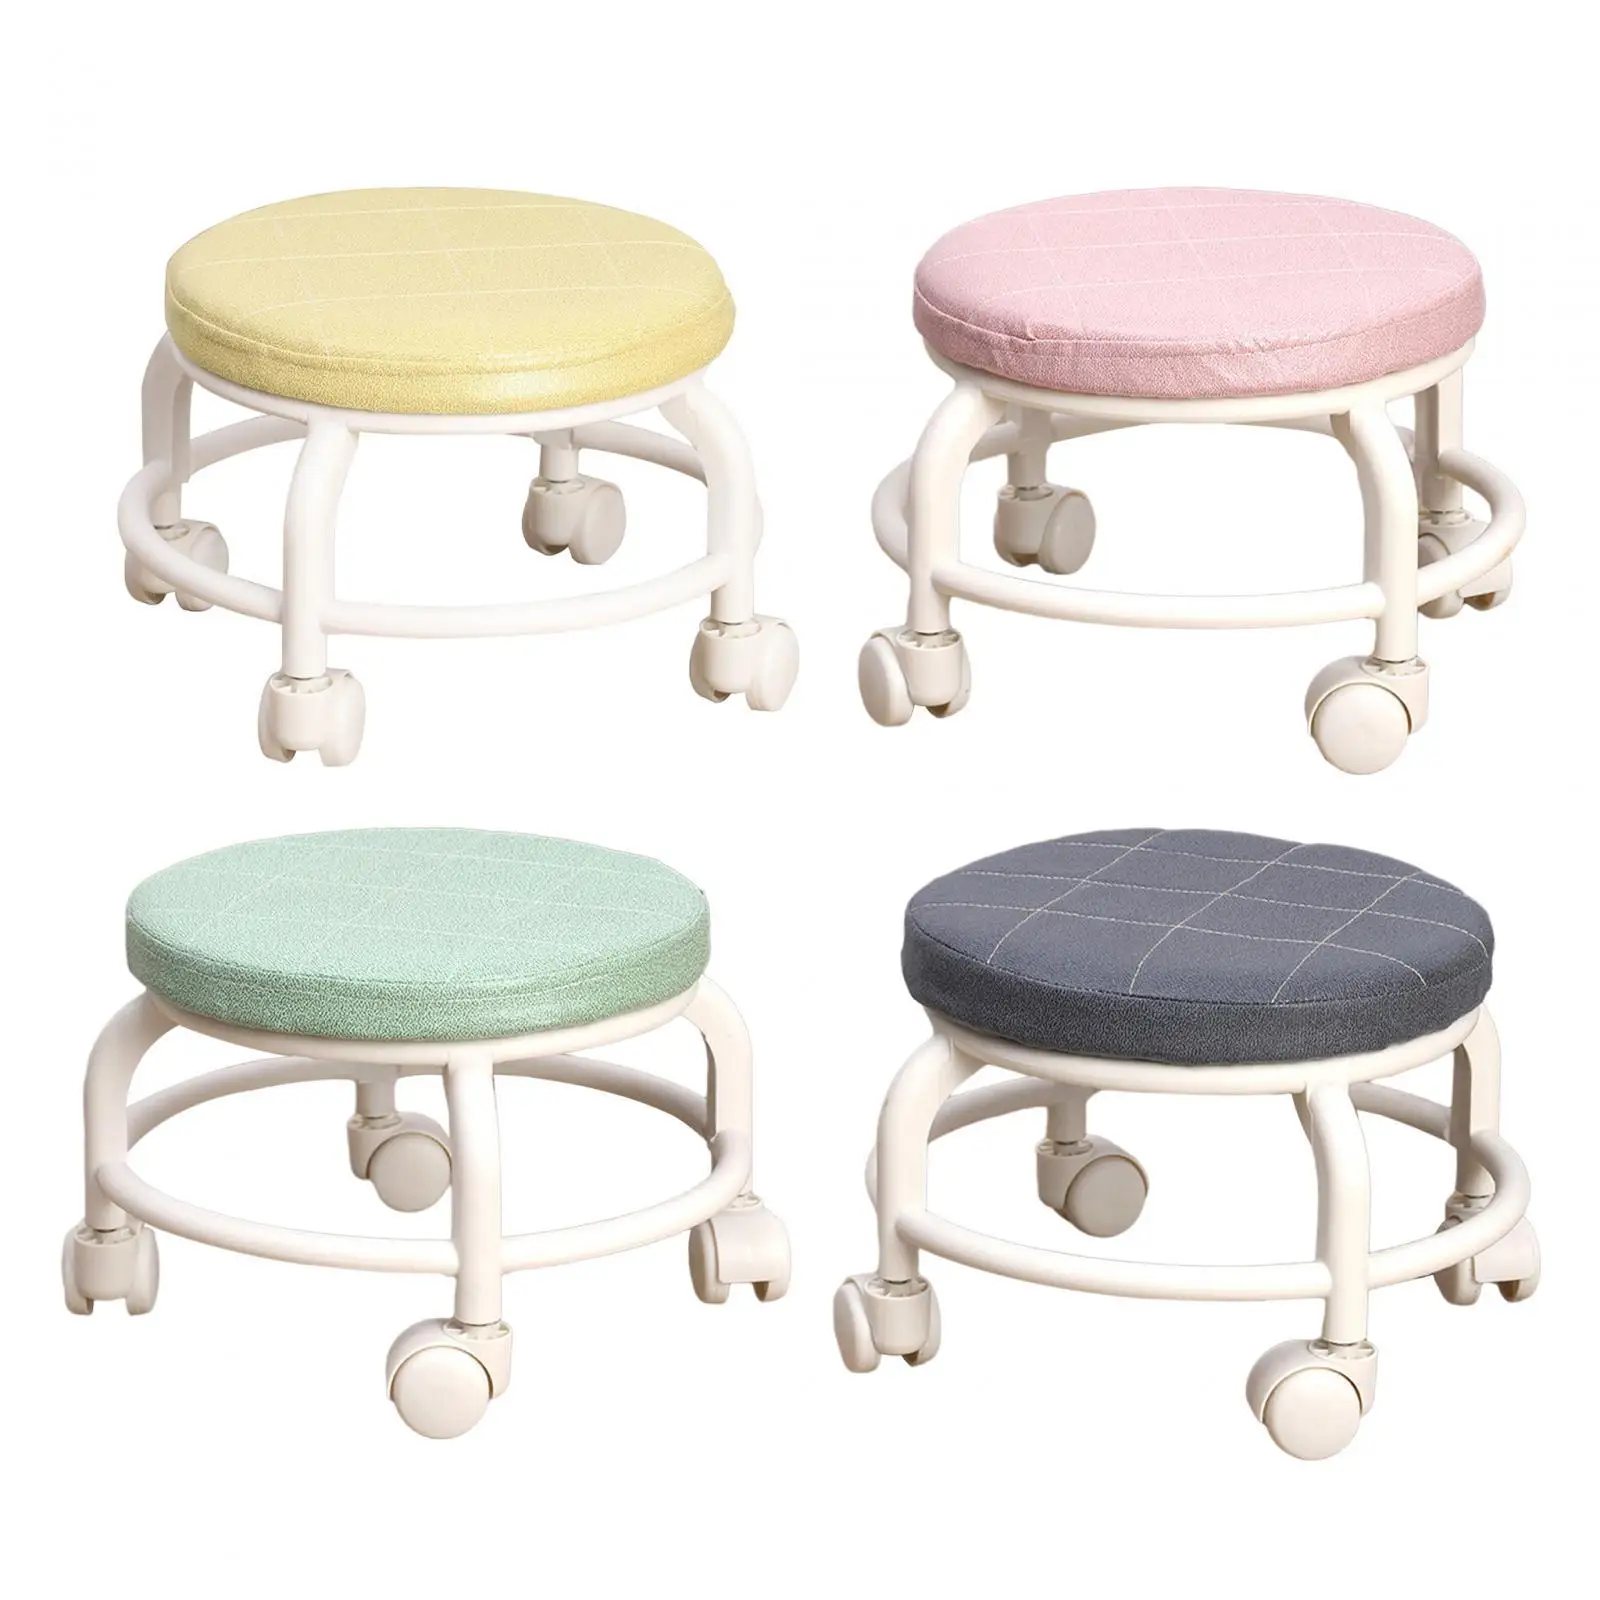 Low Round Roller Seat Stool Small Sturdy Heavy Duty Universal Swivel Casters Low Height Rolling Stool Kitchen Barber Home